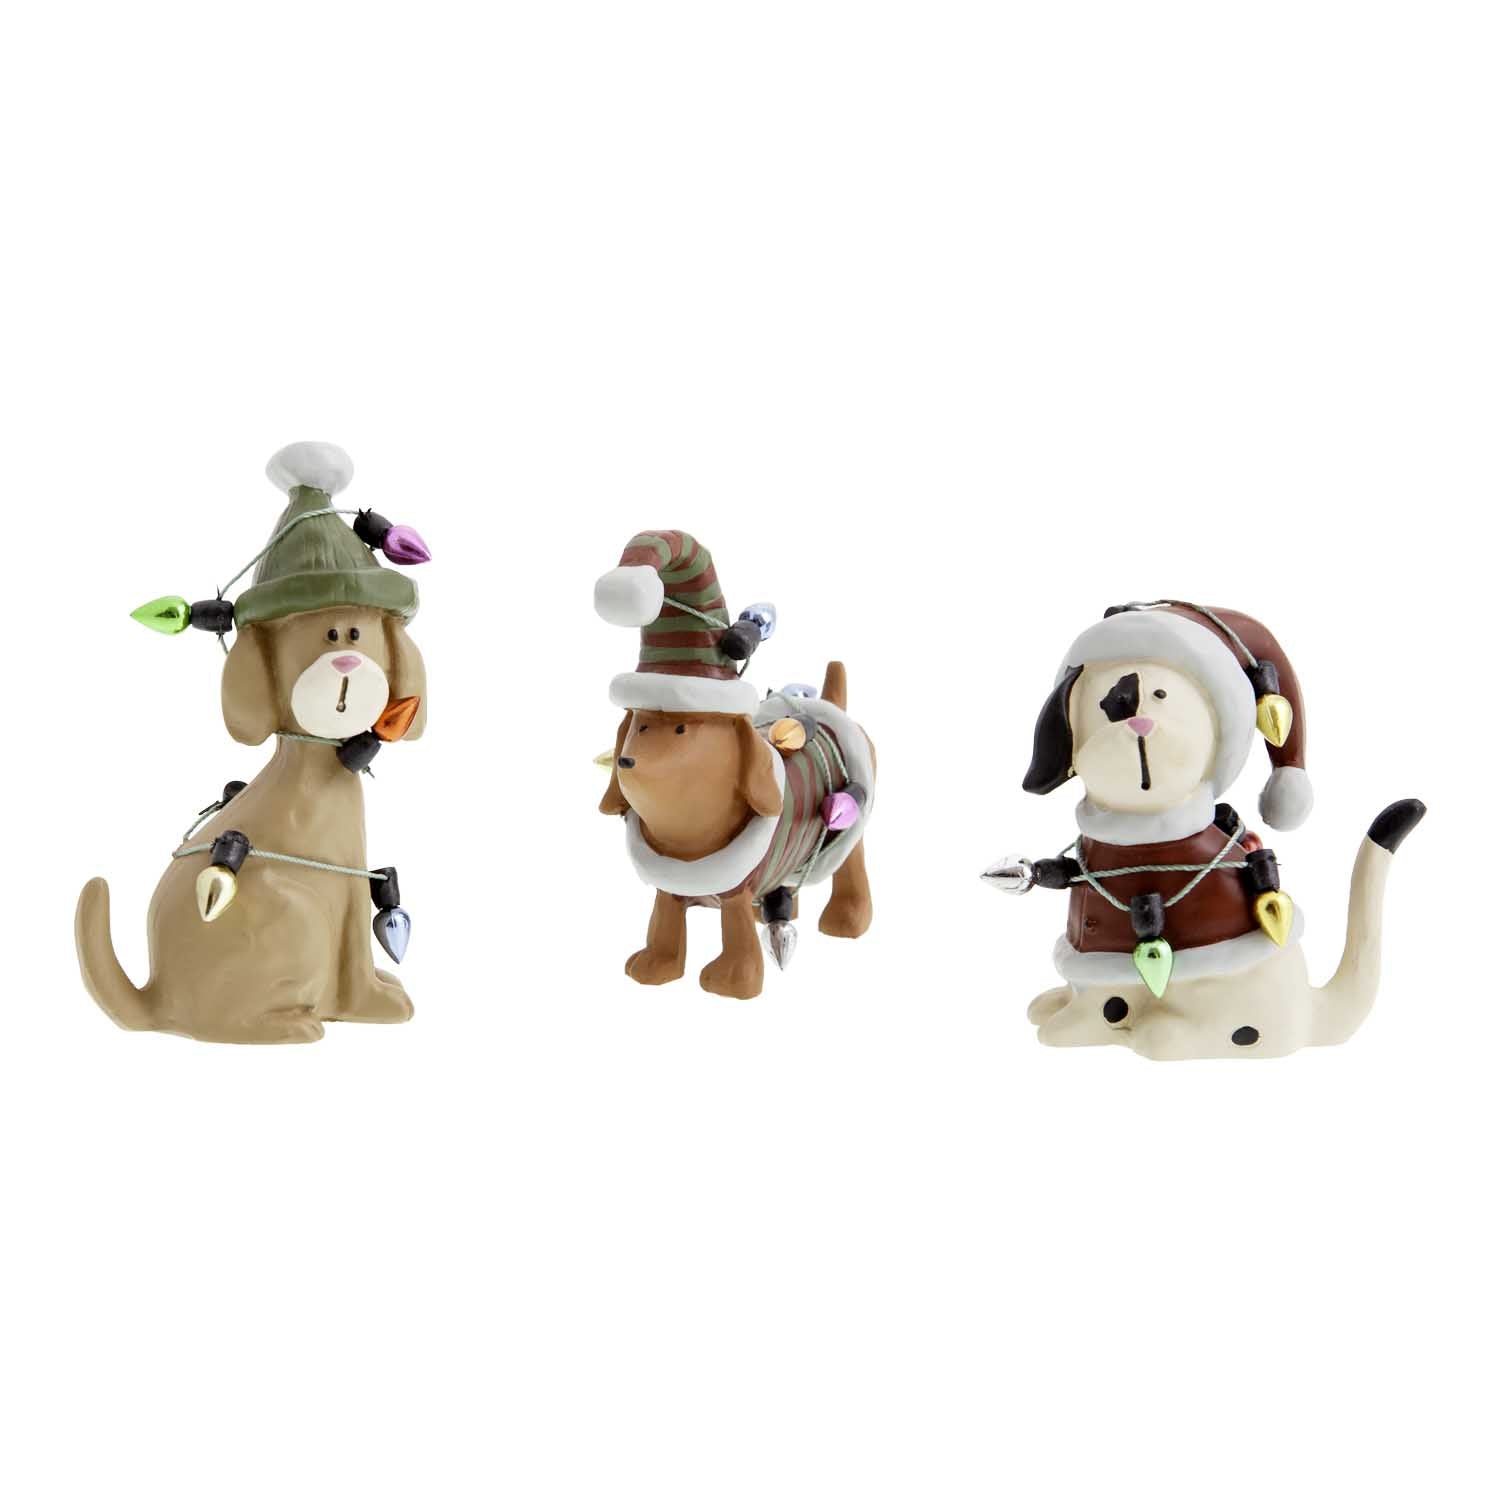 Dog Krazy Gifts - 3 dogs tangled in Xmas tree lights part of our Christmas range